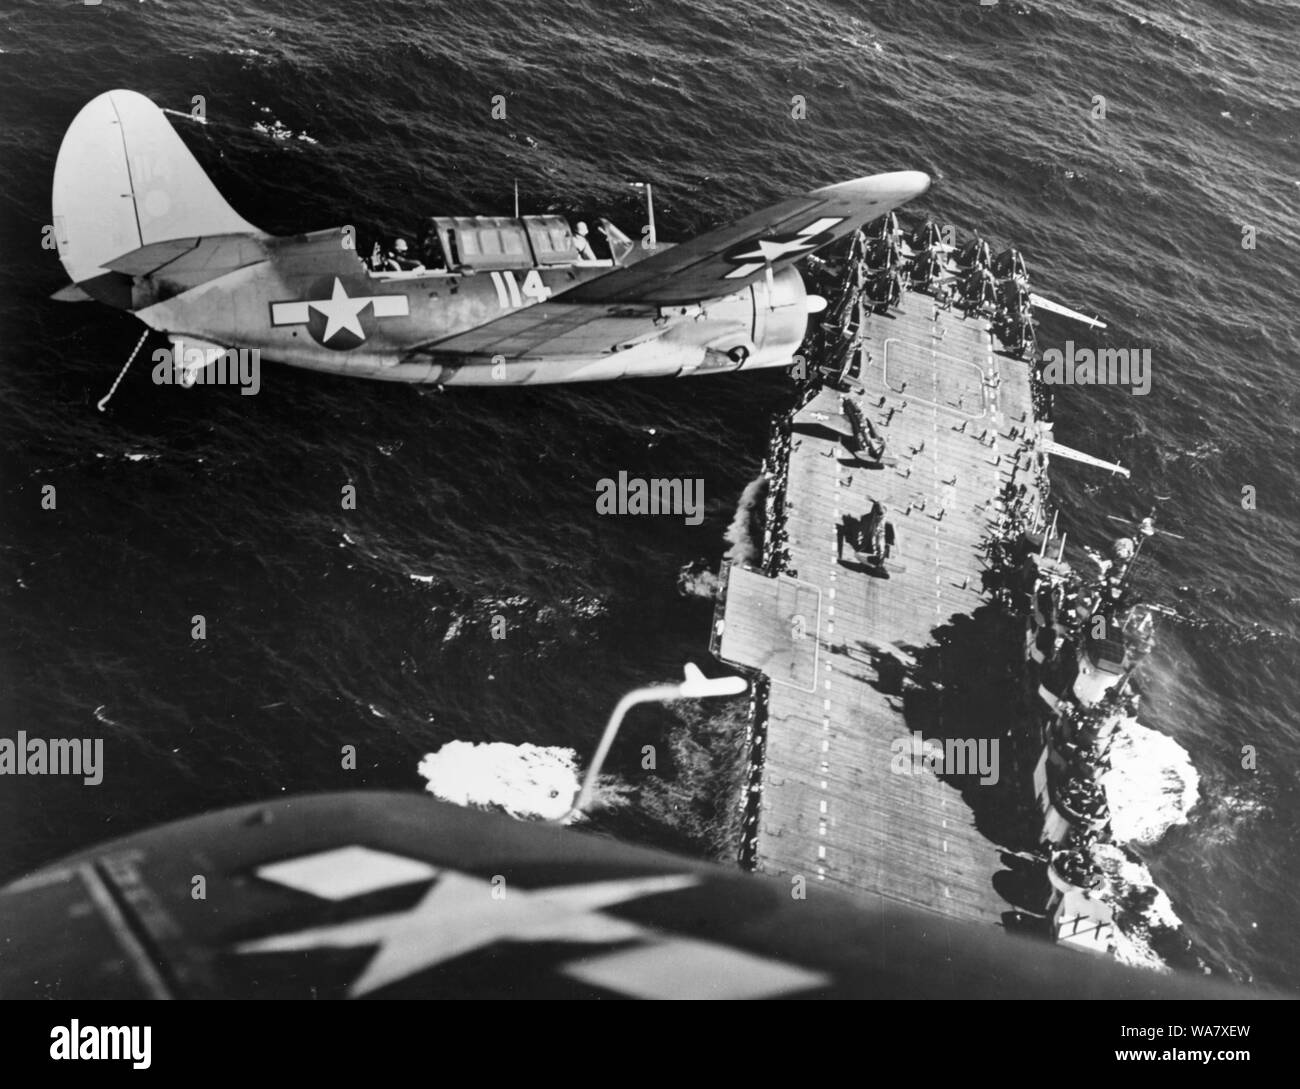 Curtiss SB2C Helldiver, a carrier-based dive bomber aircraft during World War 2. Curtiss SB2C-3 Helldiver aircraft banks over the USS Hornet (CV-12), aircraft carrier before landing, following strikes on Japanese shipping in the China Sea, circa 1945 Stock Photo